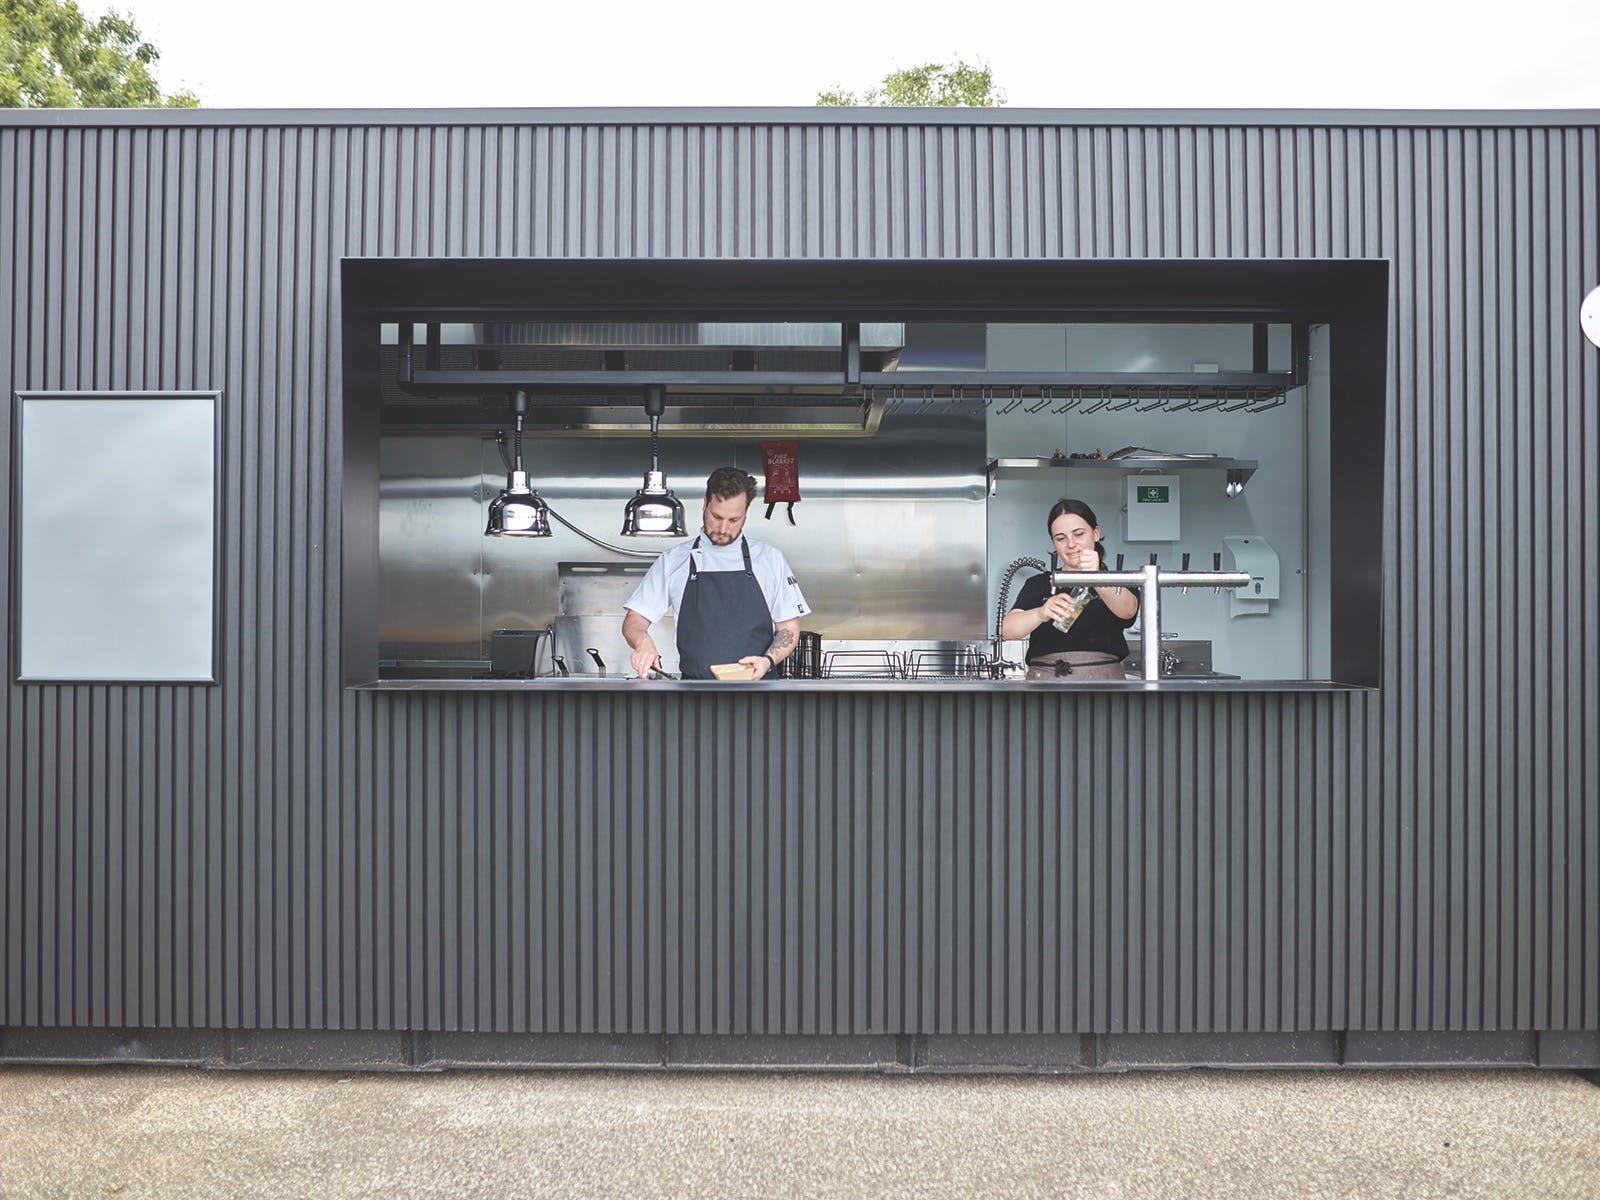 9 craft breweries and a cidery to explore - Visit Geelong & The Bellarine